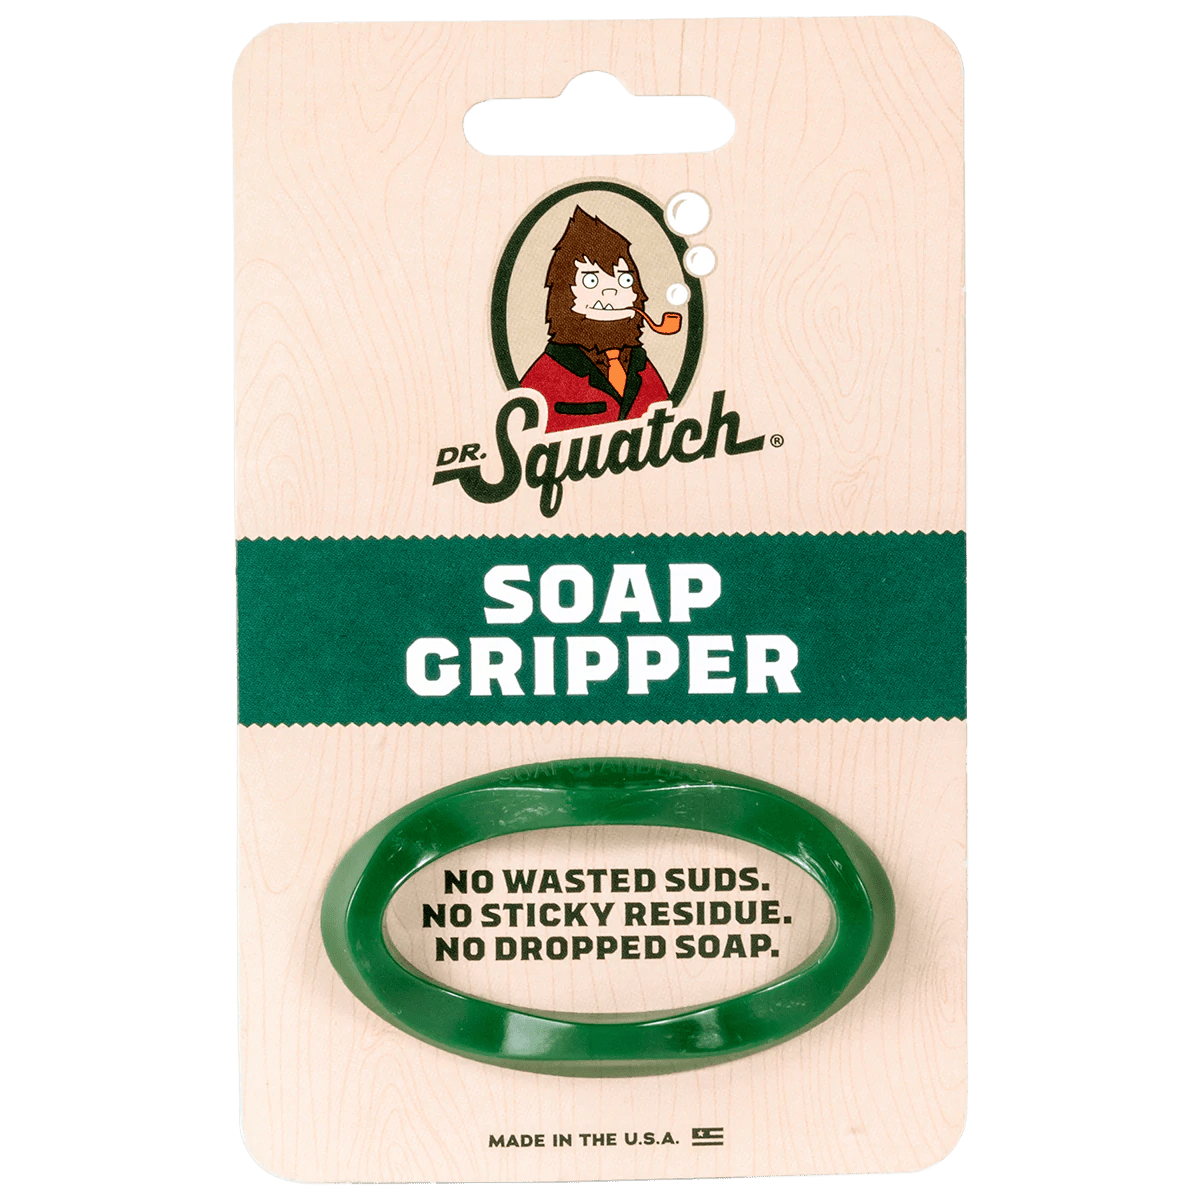 Sasquatch Soap Gifts & Merchandise for Sale